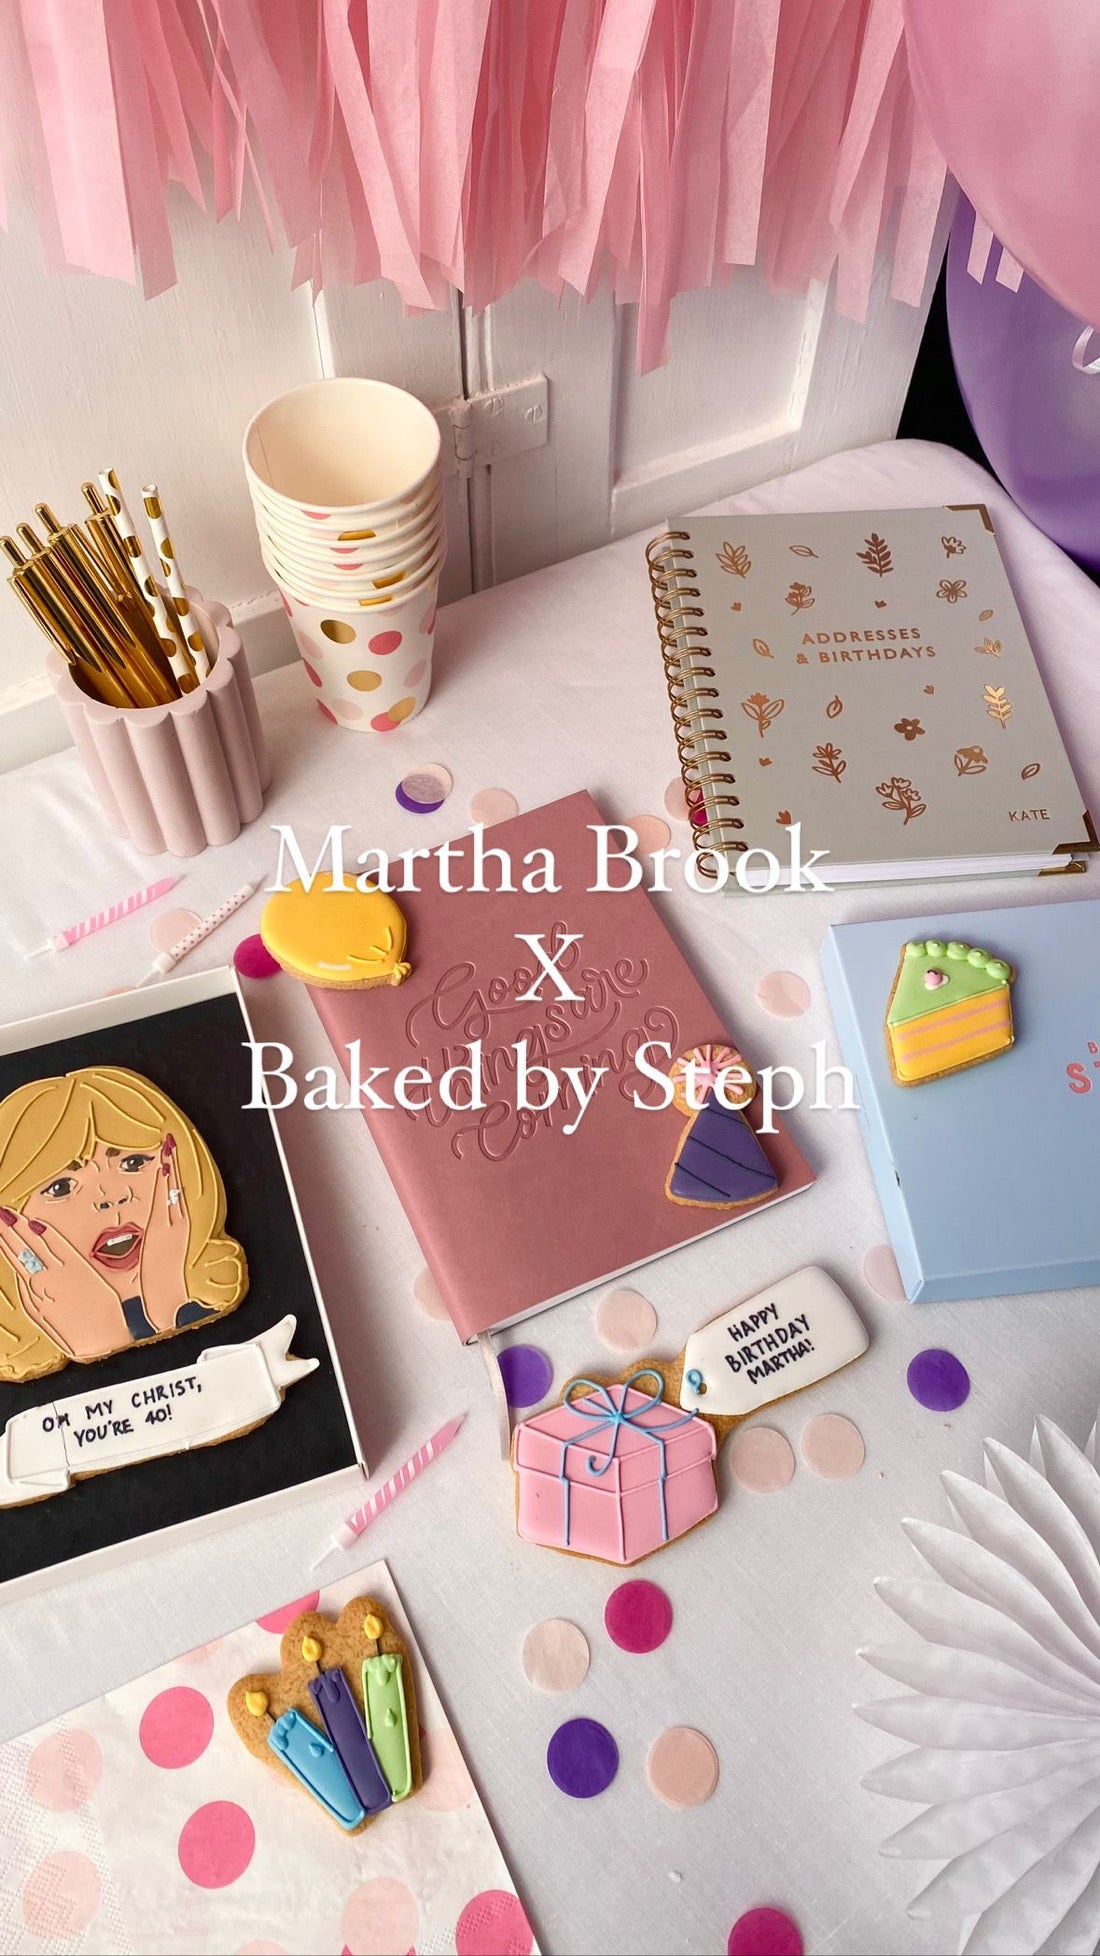 Baked by Steph chats to Martha Brook!